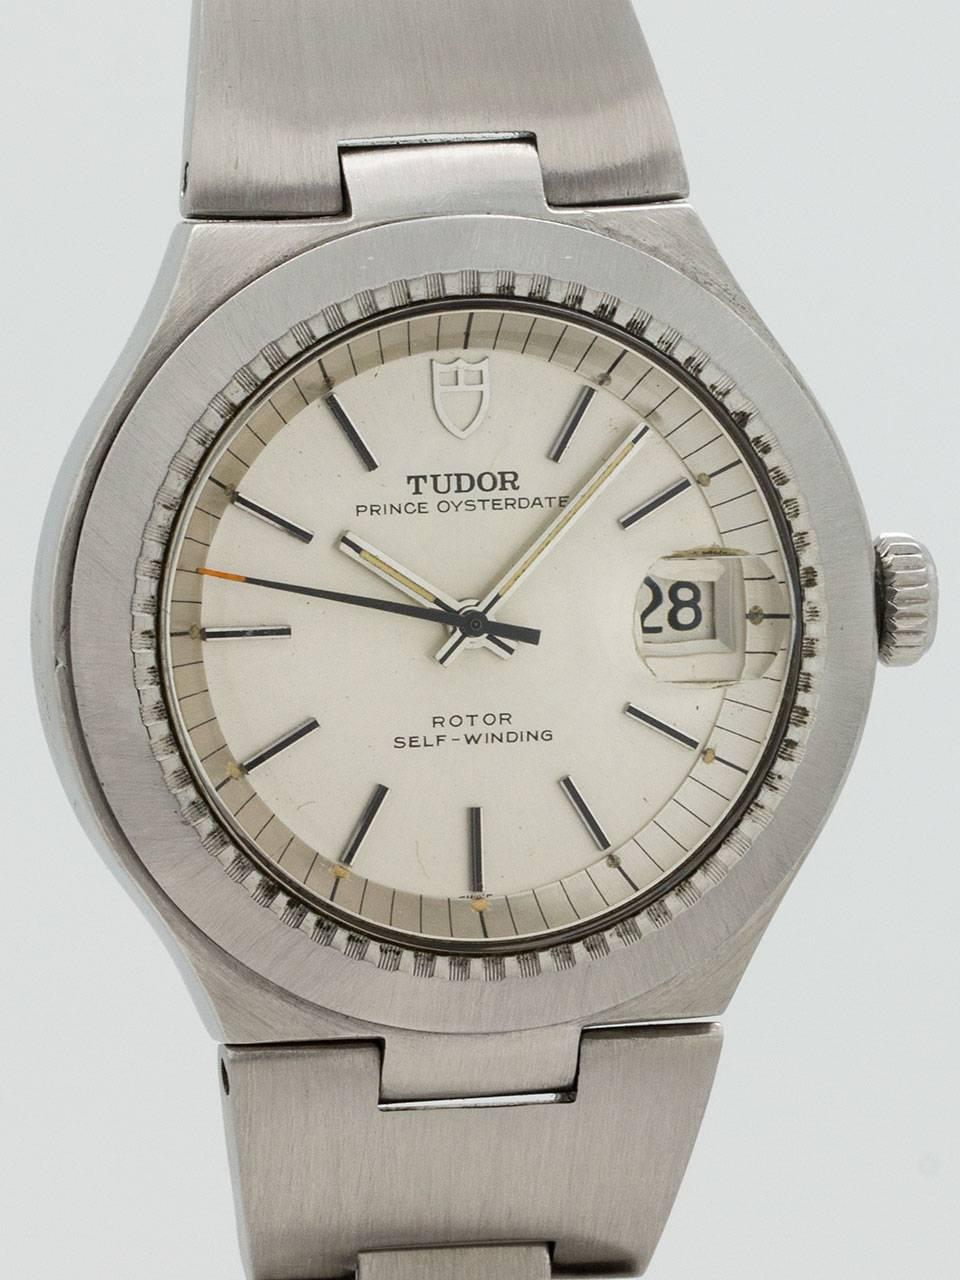 Tudor Prince Oysterdate ref 9101/0 circa 1973. Unusual and cool moderne design tonneau shaped Oyster case with screw down Rolex crown, screw down case back, sloped bezel with engine turn inner pattern and acrylic crystal. Original silvered satin